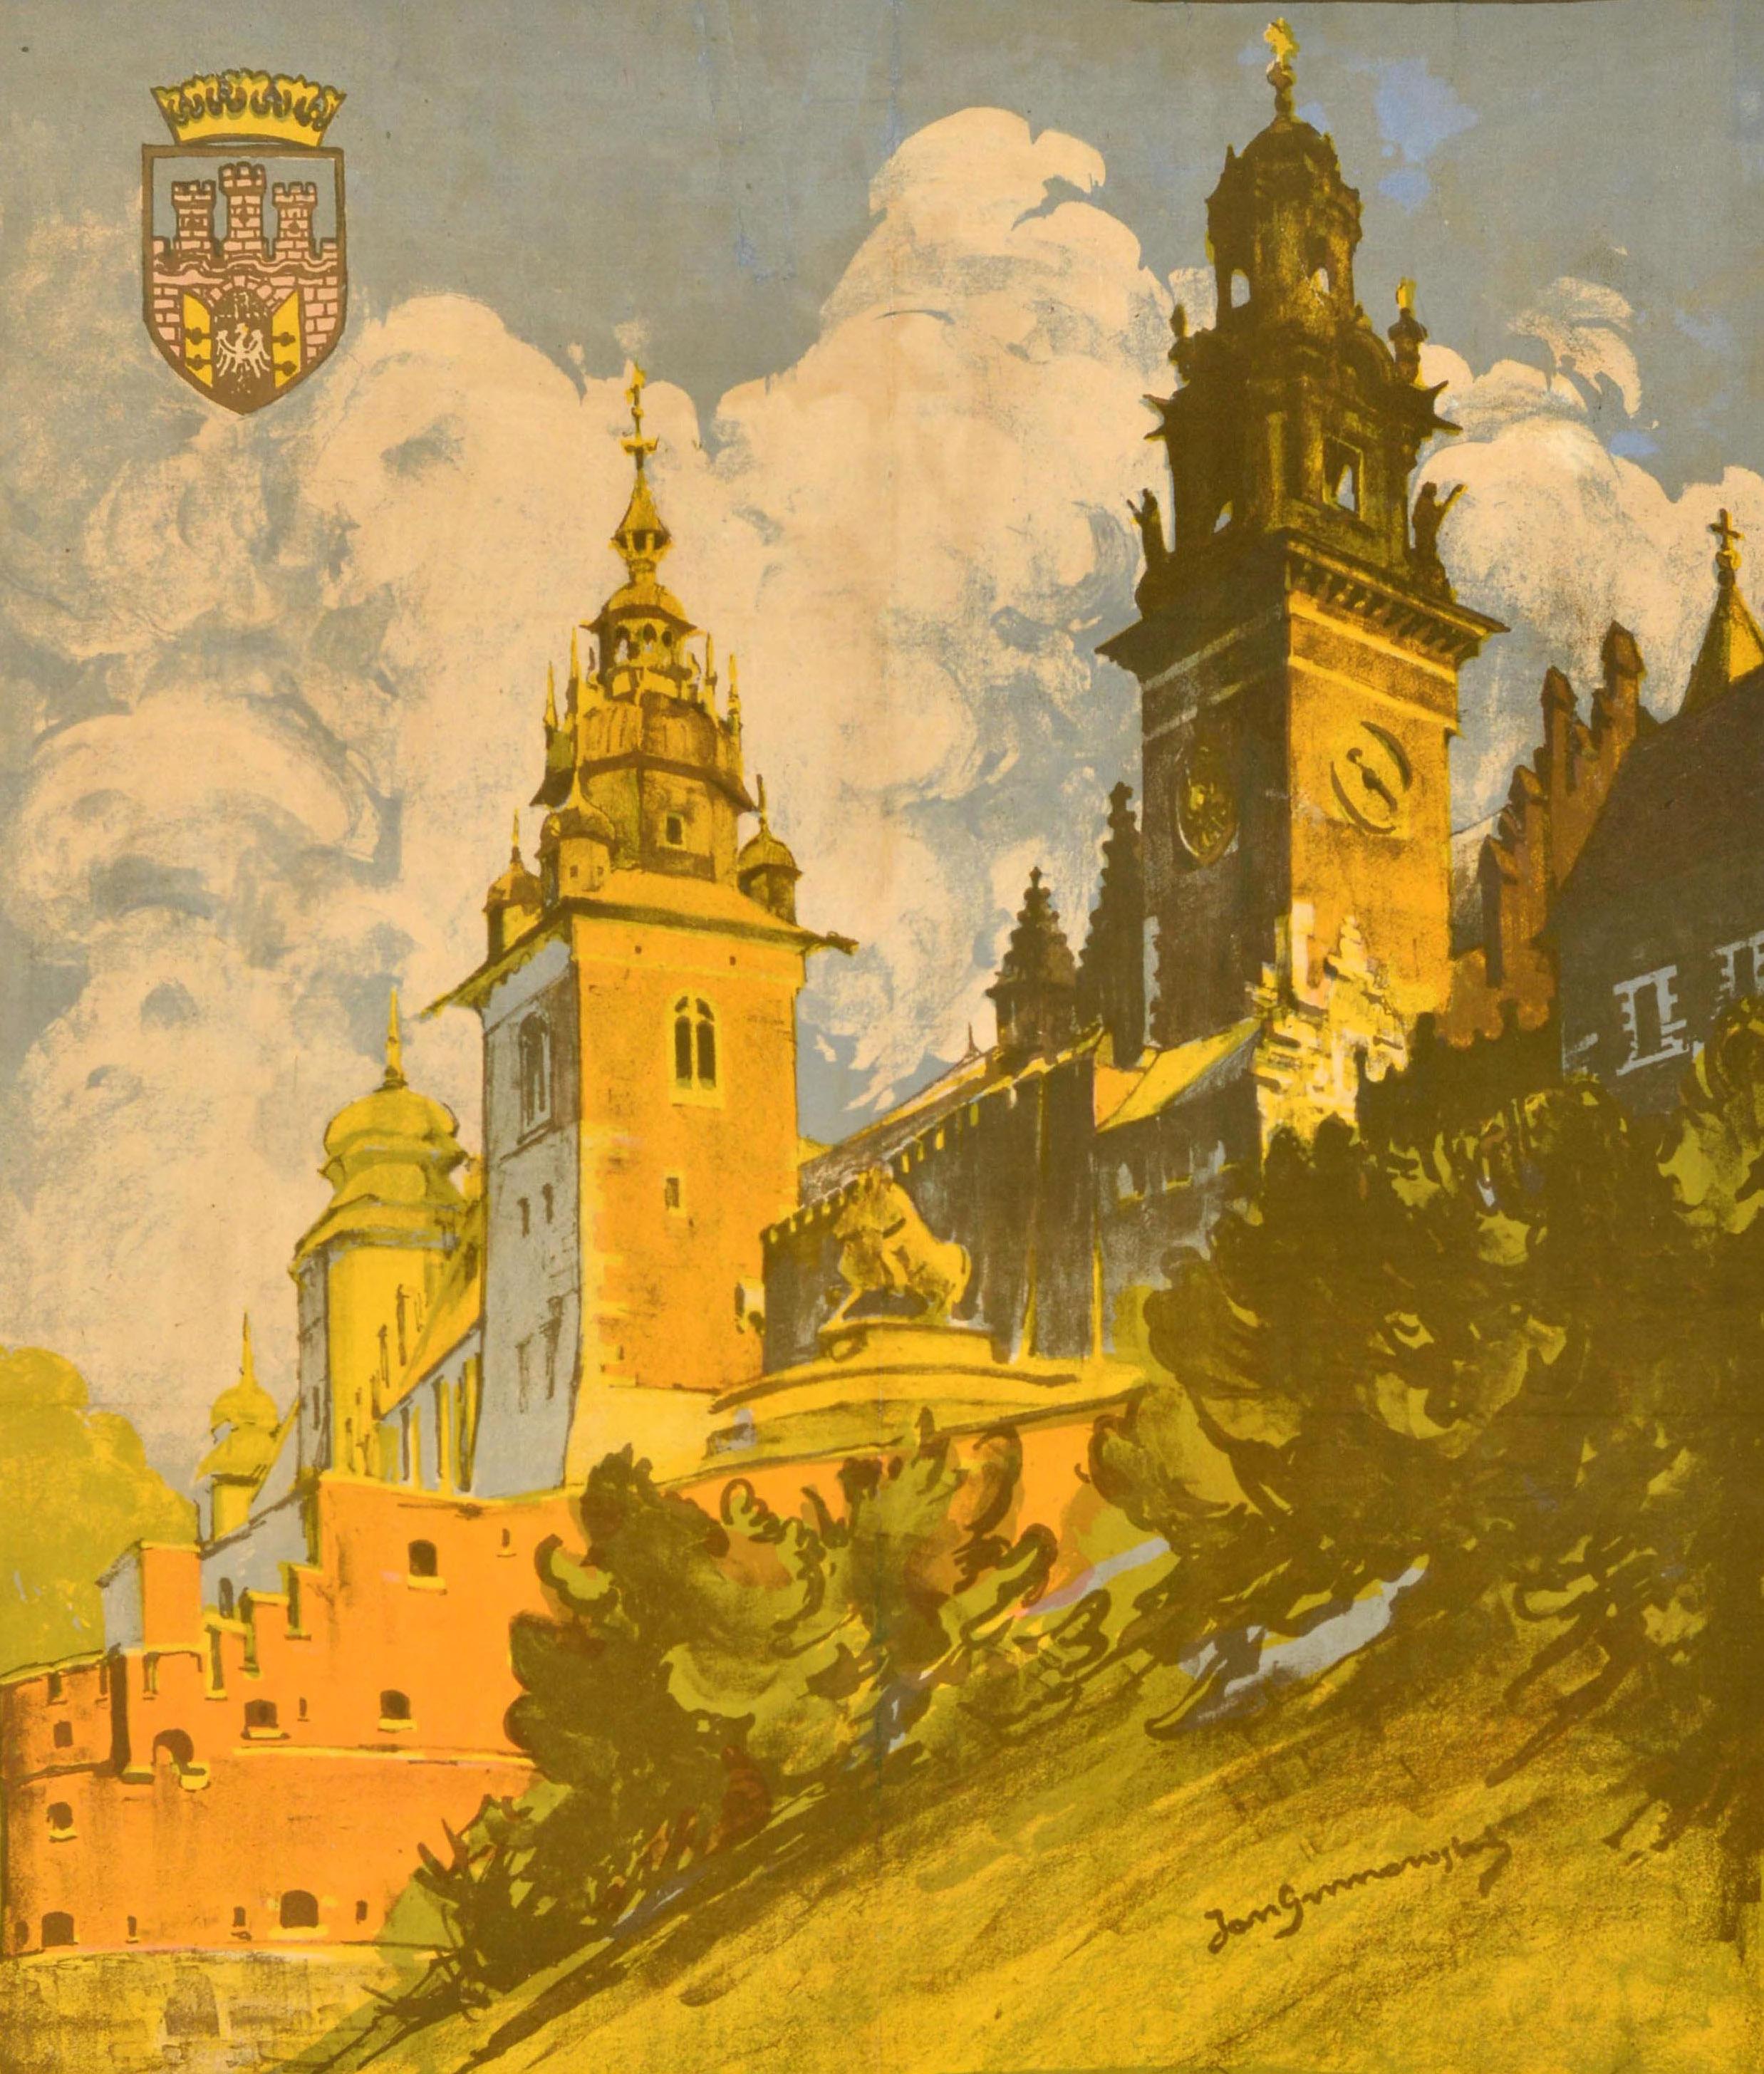 Original antique travel poster for Krakau / Krakow in Poland featuring artwork of the historic 14th century royal Wawel Castle in the medieval old town (a UNESCO World Heritage Site since 1978) with the text in German below: Tour of the Ancient